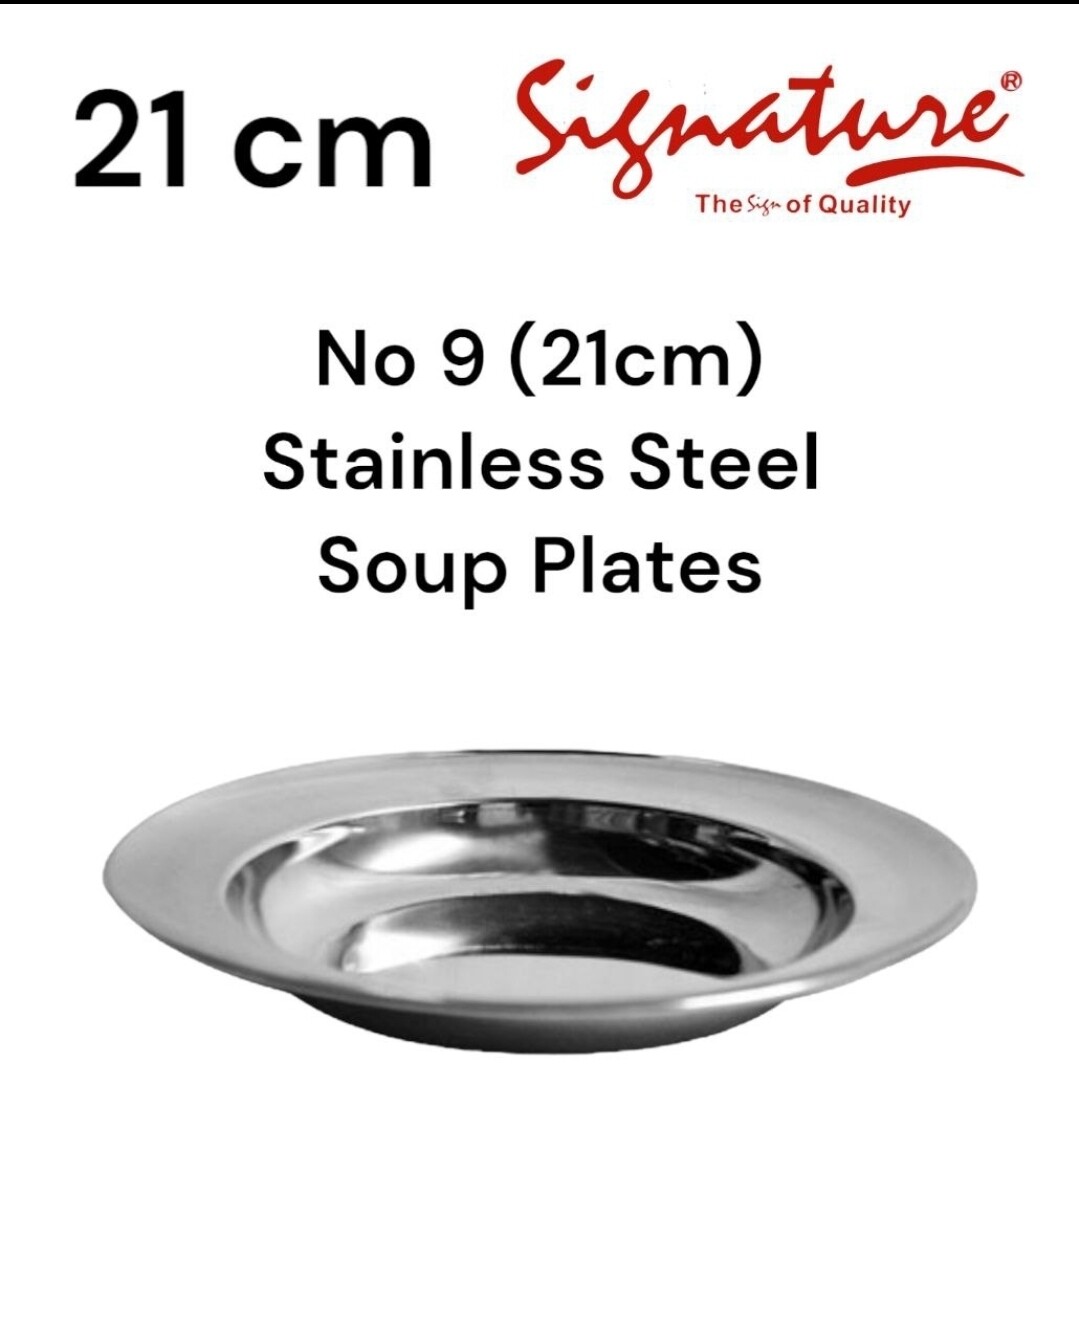 Signature stainless steel soup plate 21cm